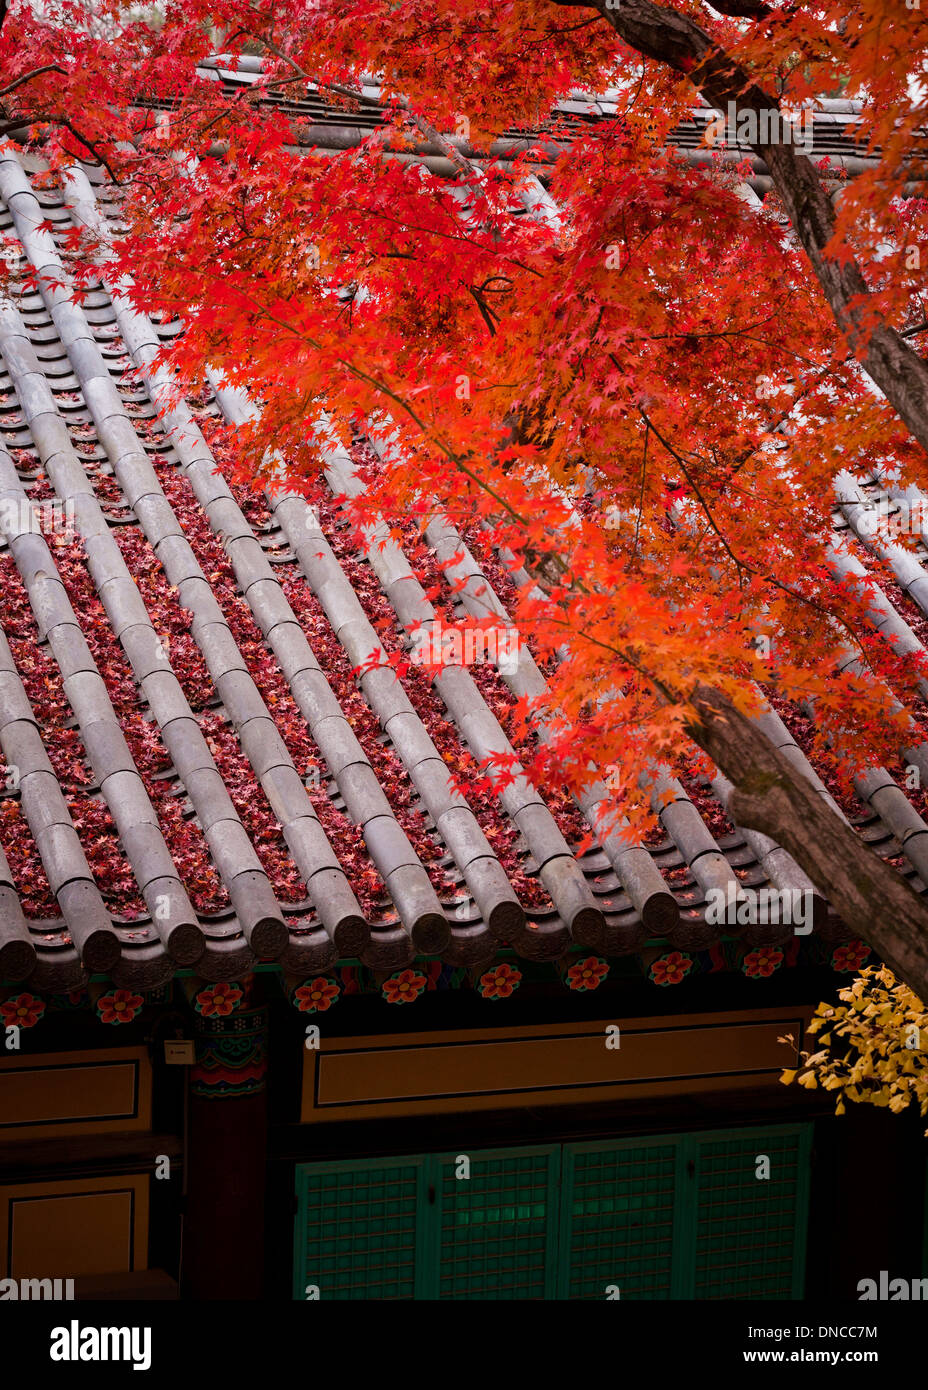 Fall color maple leaves in front of traditional Korean architecture (Hanok) - South Korea Stock Photo